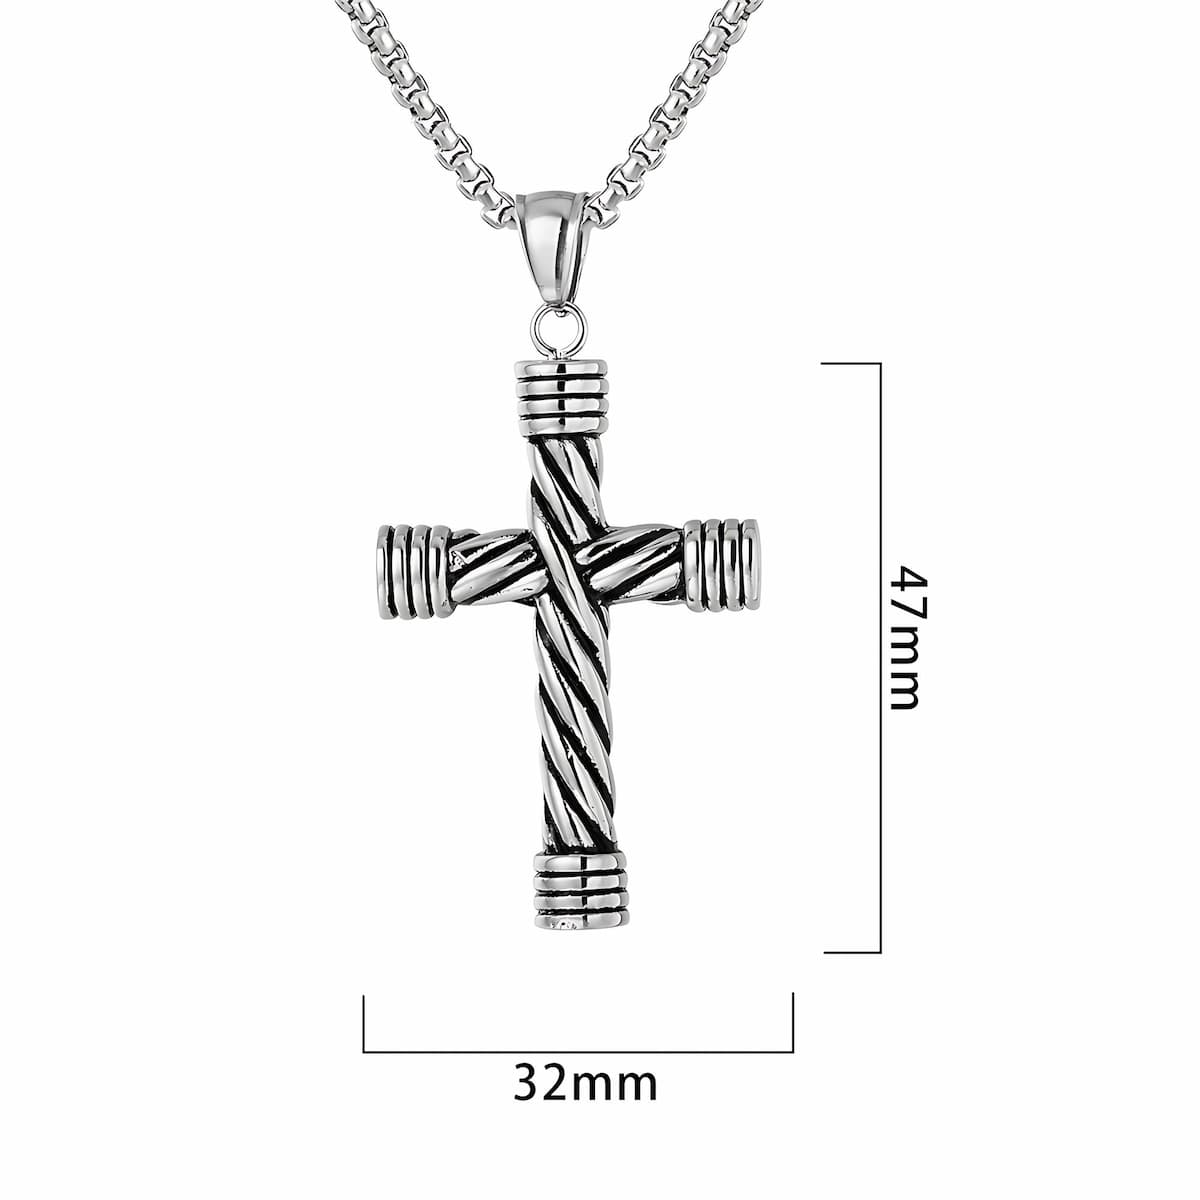 Stainless Steel Cross Necklace Size Xenos Jewelry